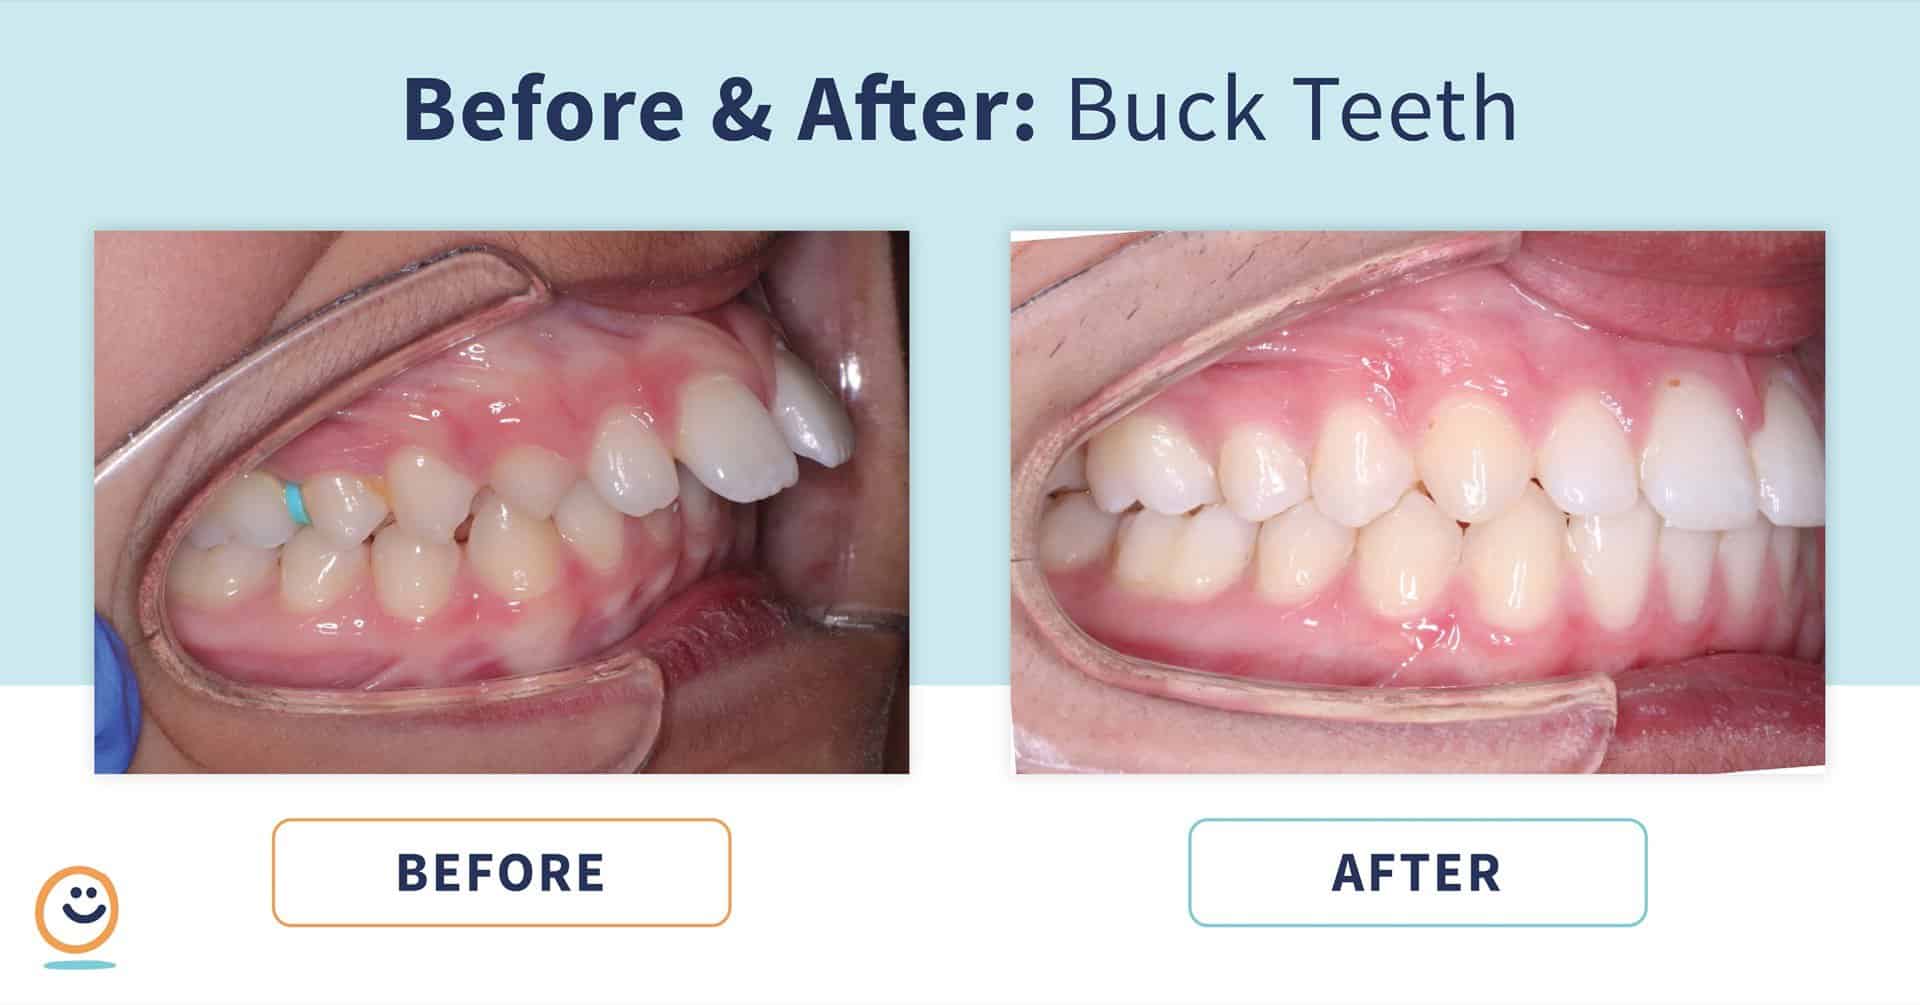 Astrolabe Ved naturpark Braces: Before and After Buck Teeth